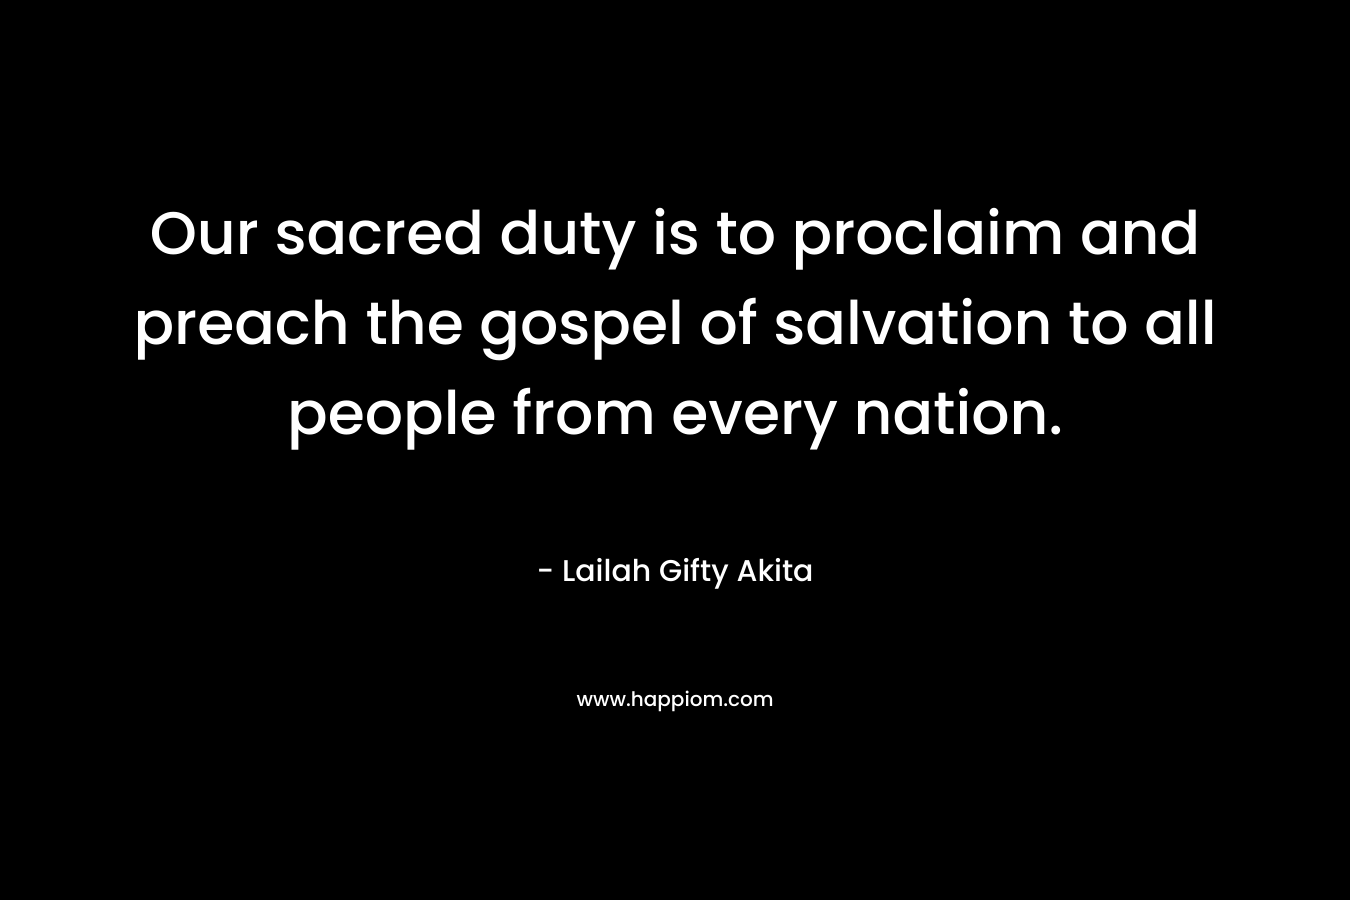 Our sacred duty is to proclaim and preach the gospel of salvation to all people from every nation.